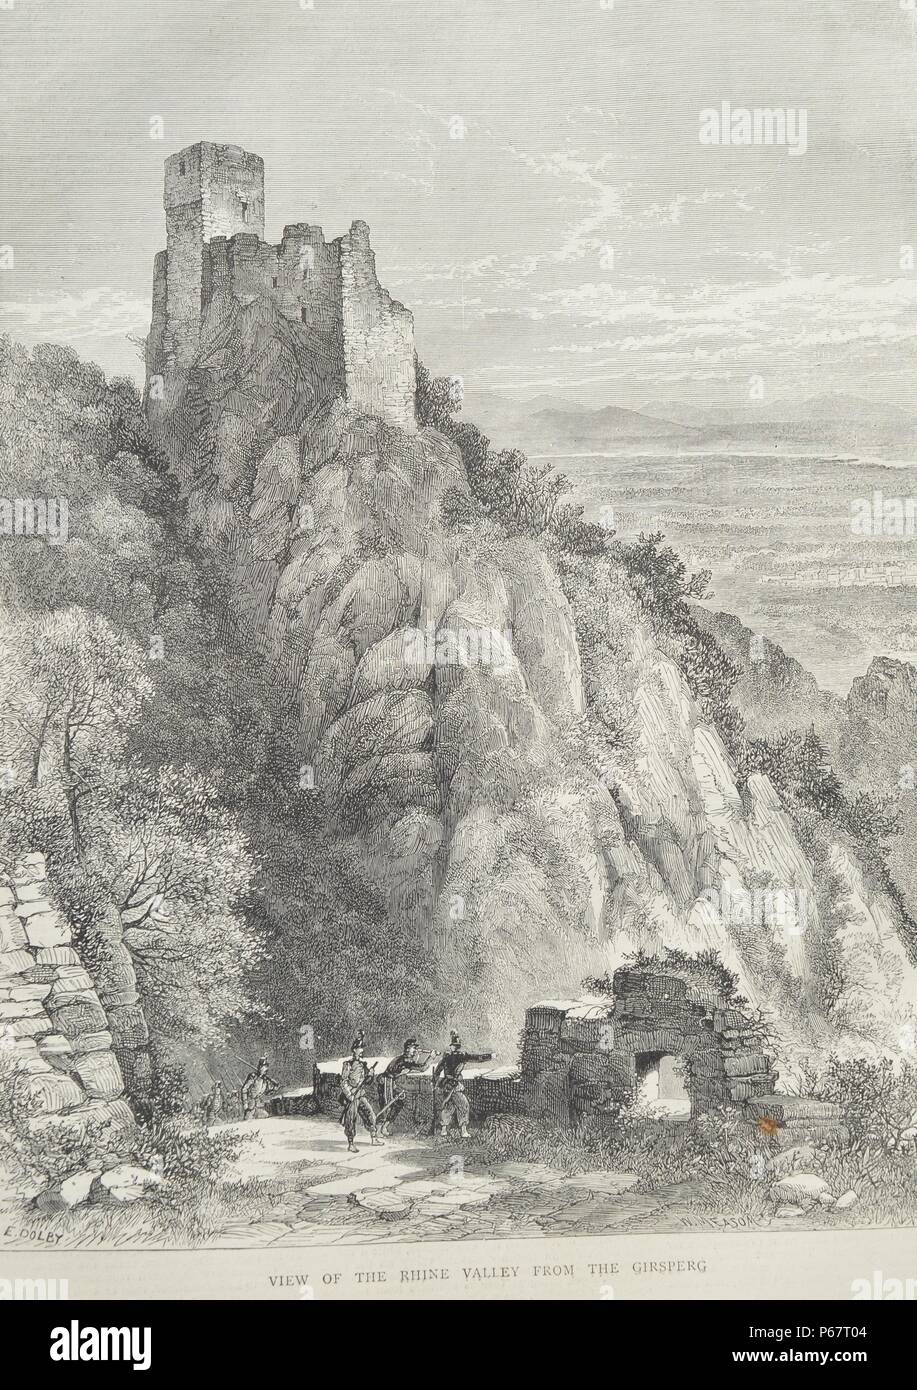 Engraving shows a view of the Rhine Valley from the Girsperg where German soldiers are keeping watch. Dated 1870 Stock Photo